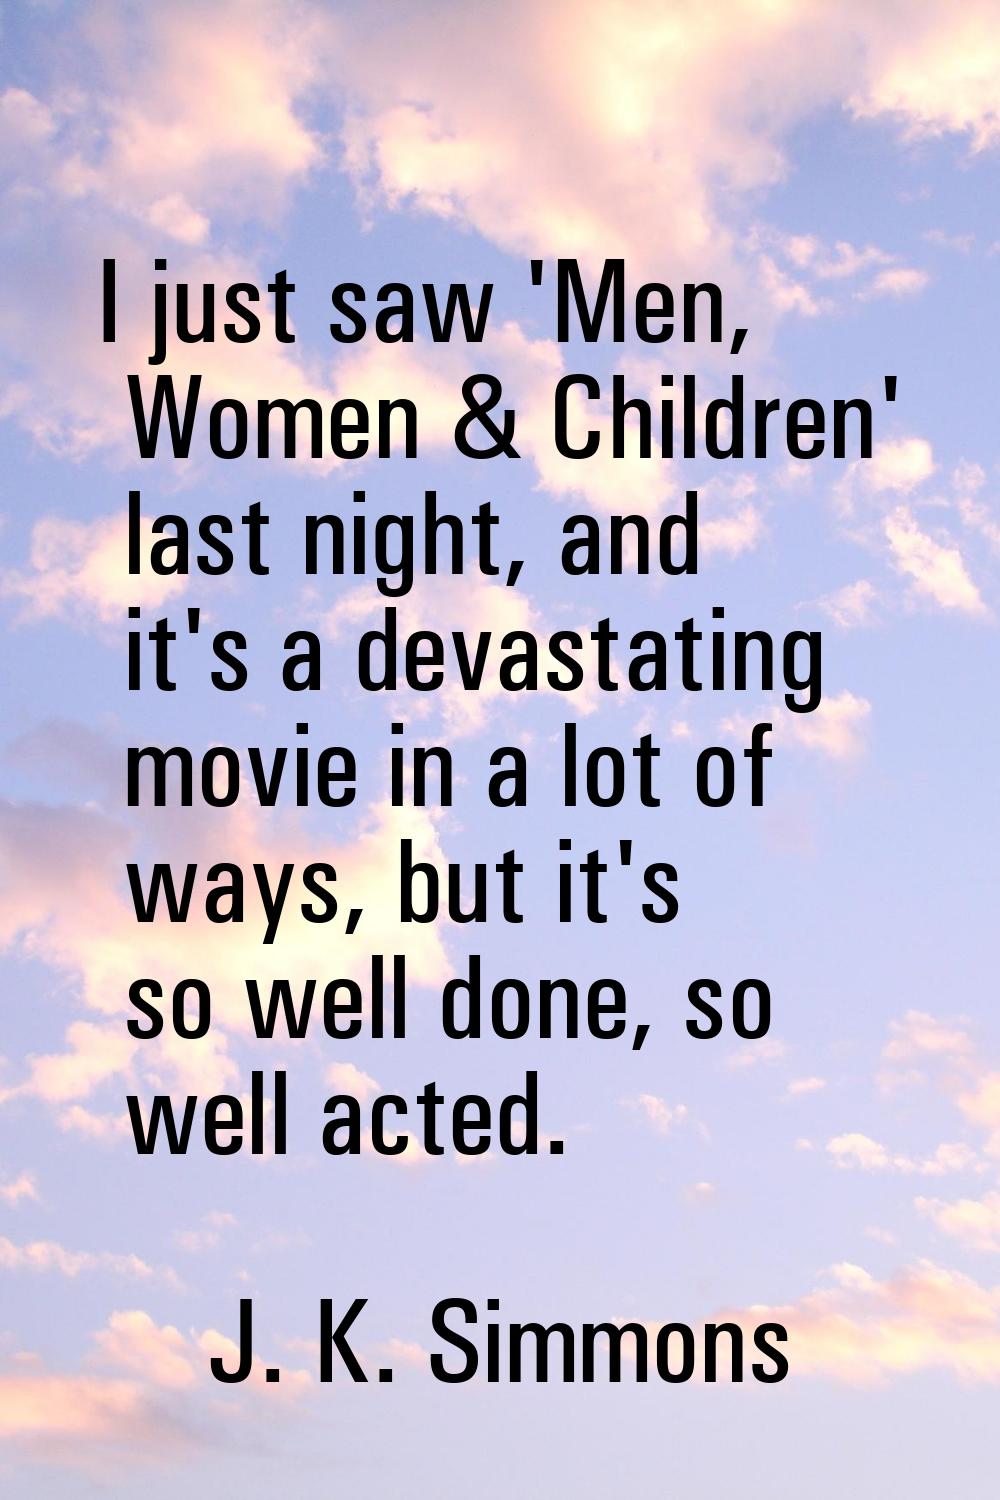 I just saw 'Men, Women & Children' last night, and it's a devastating movie in a lot of ways, but i